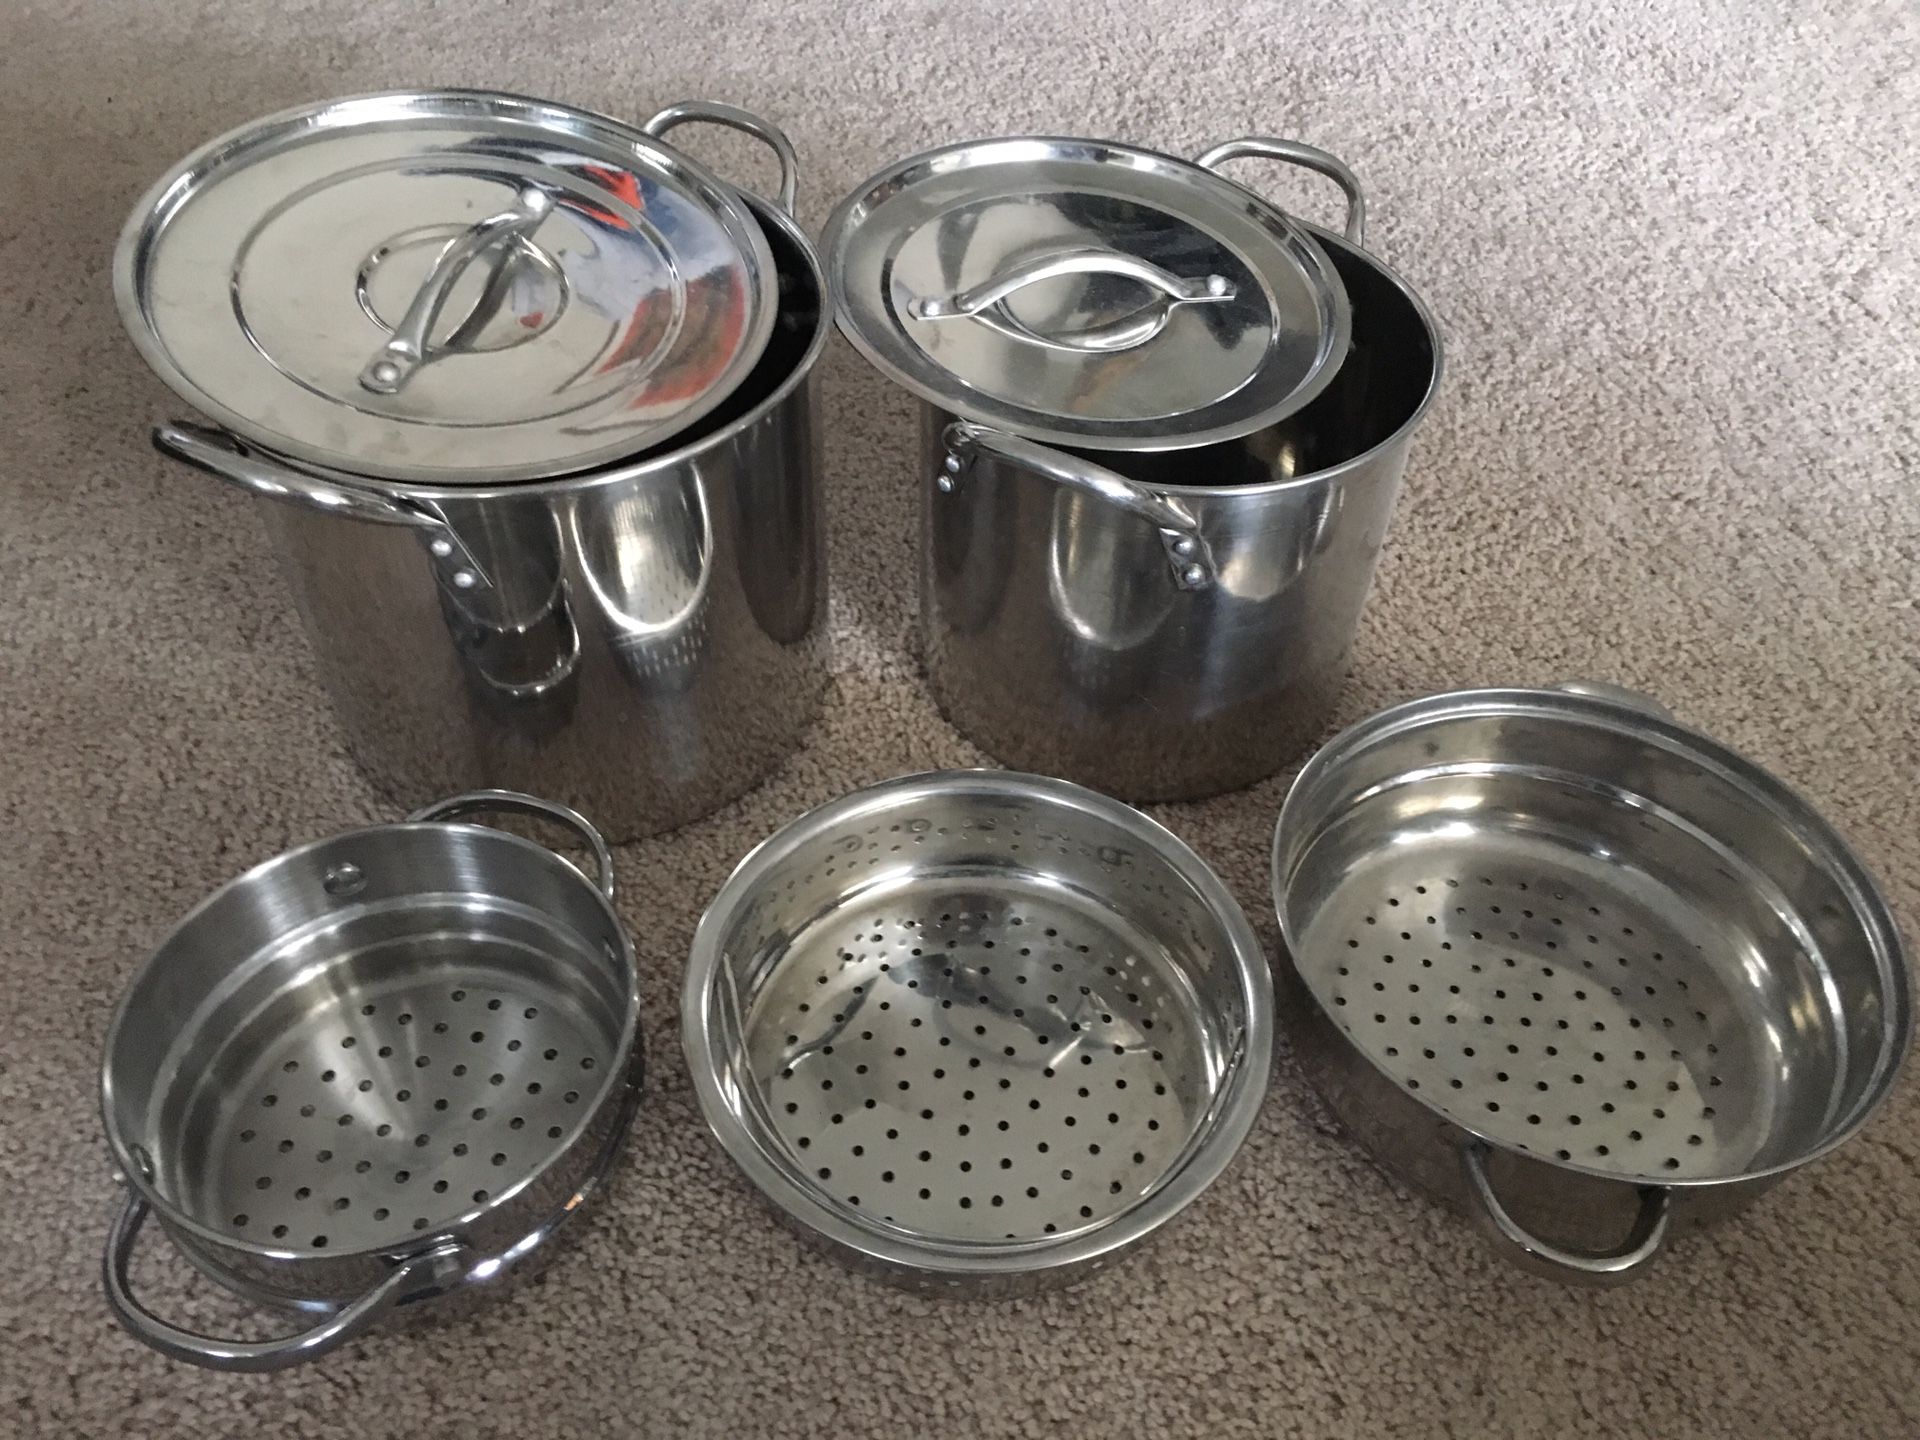 2 large canning/soup/steamer pots with 3 strainers. Excellent condition